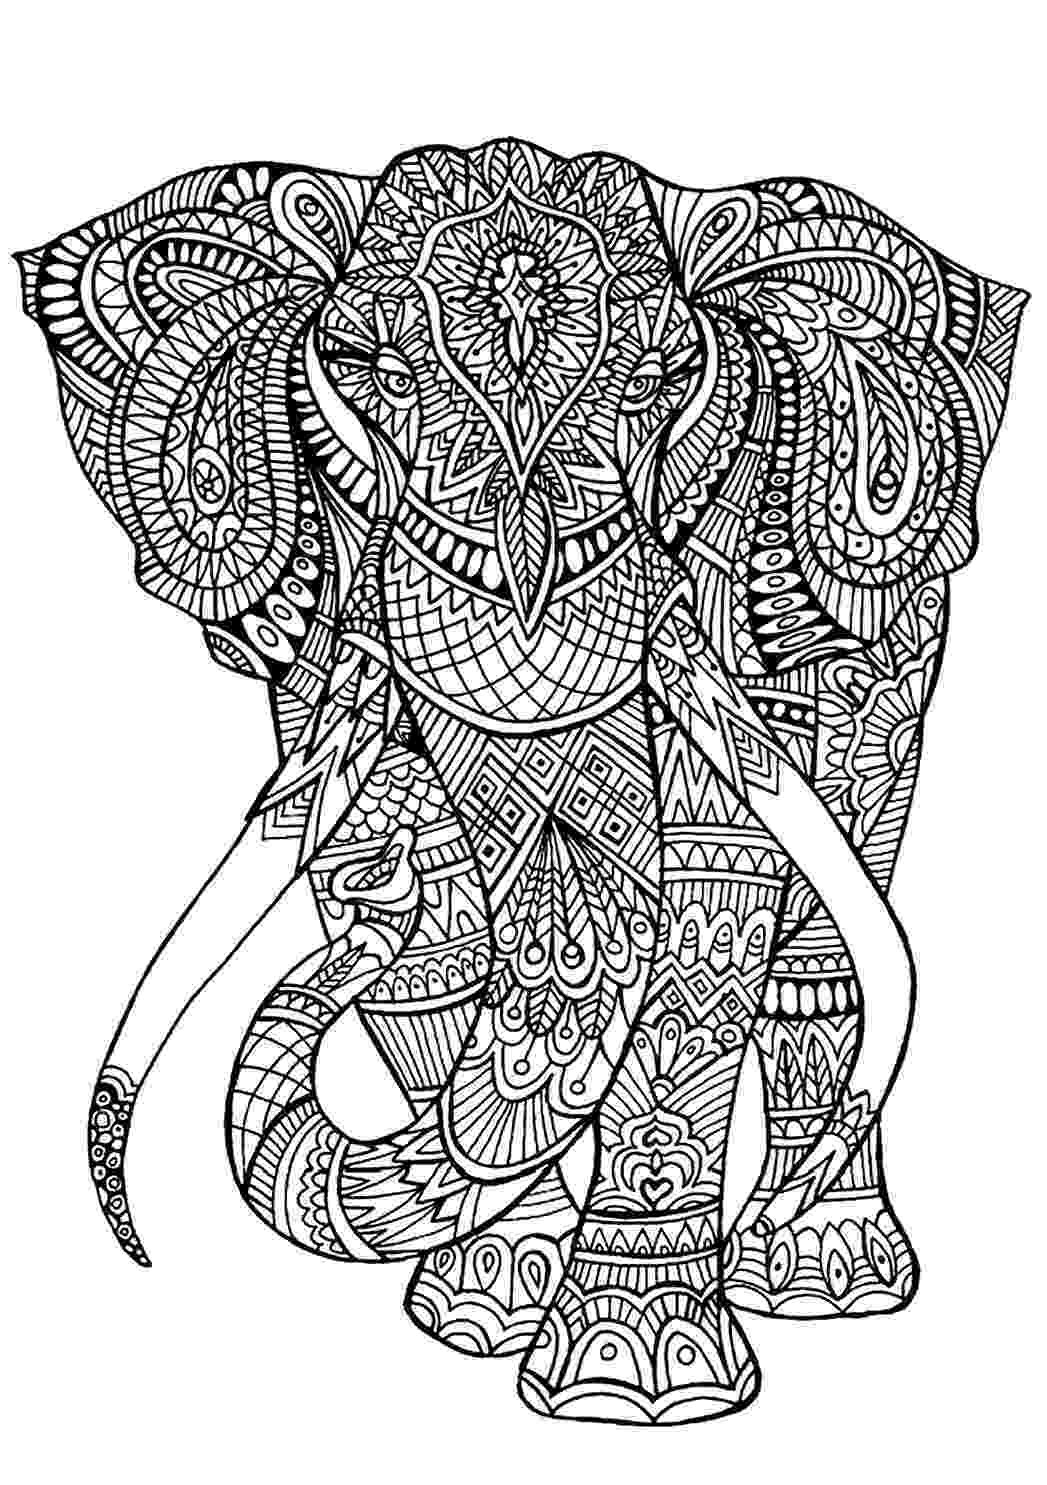 colouring pages adults online free images like this one intended for adults to color can pages free online colouring adults 